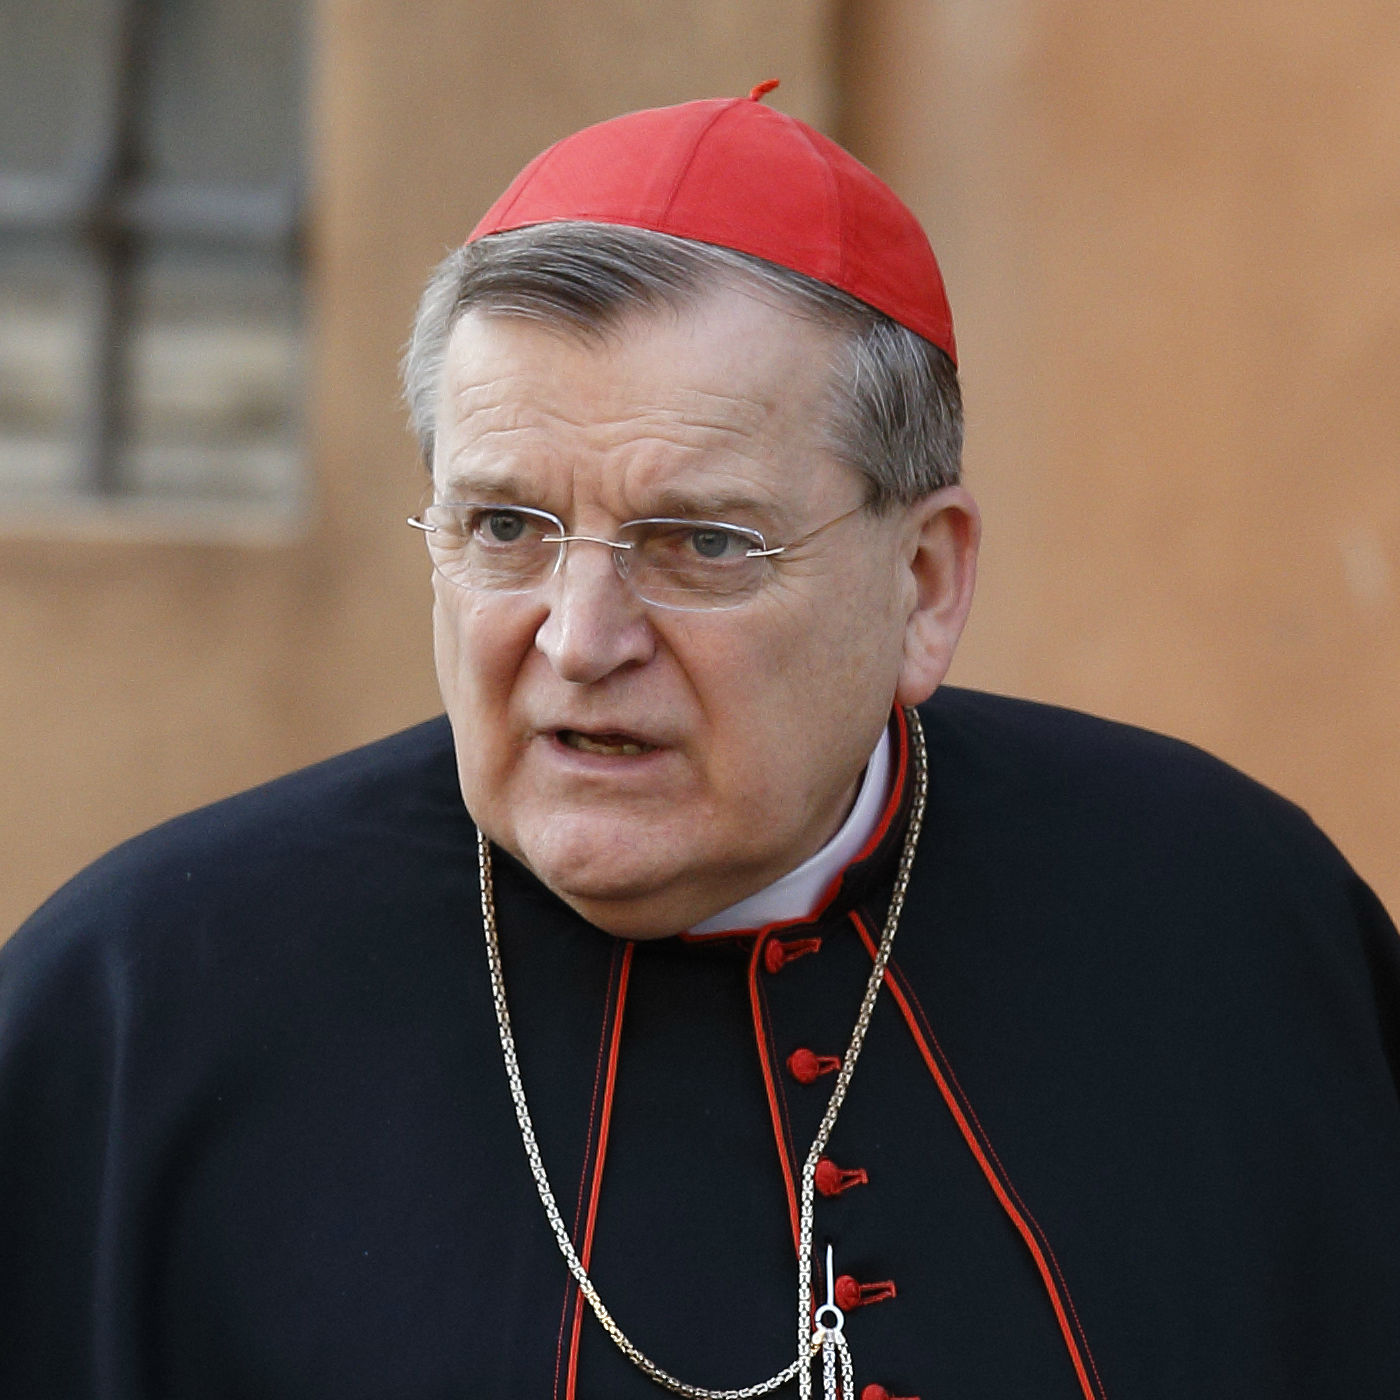 Cardinal Burke accuses Francis of 'increasing the confusion' in the Church 